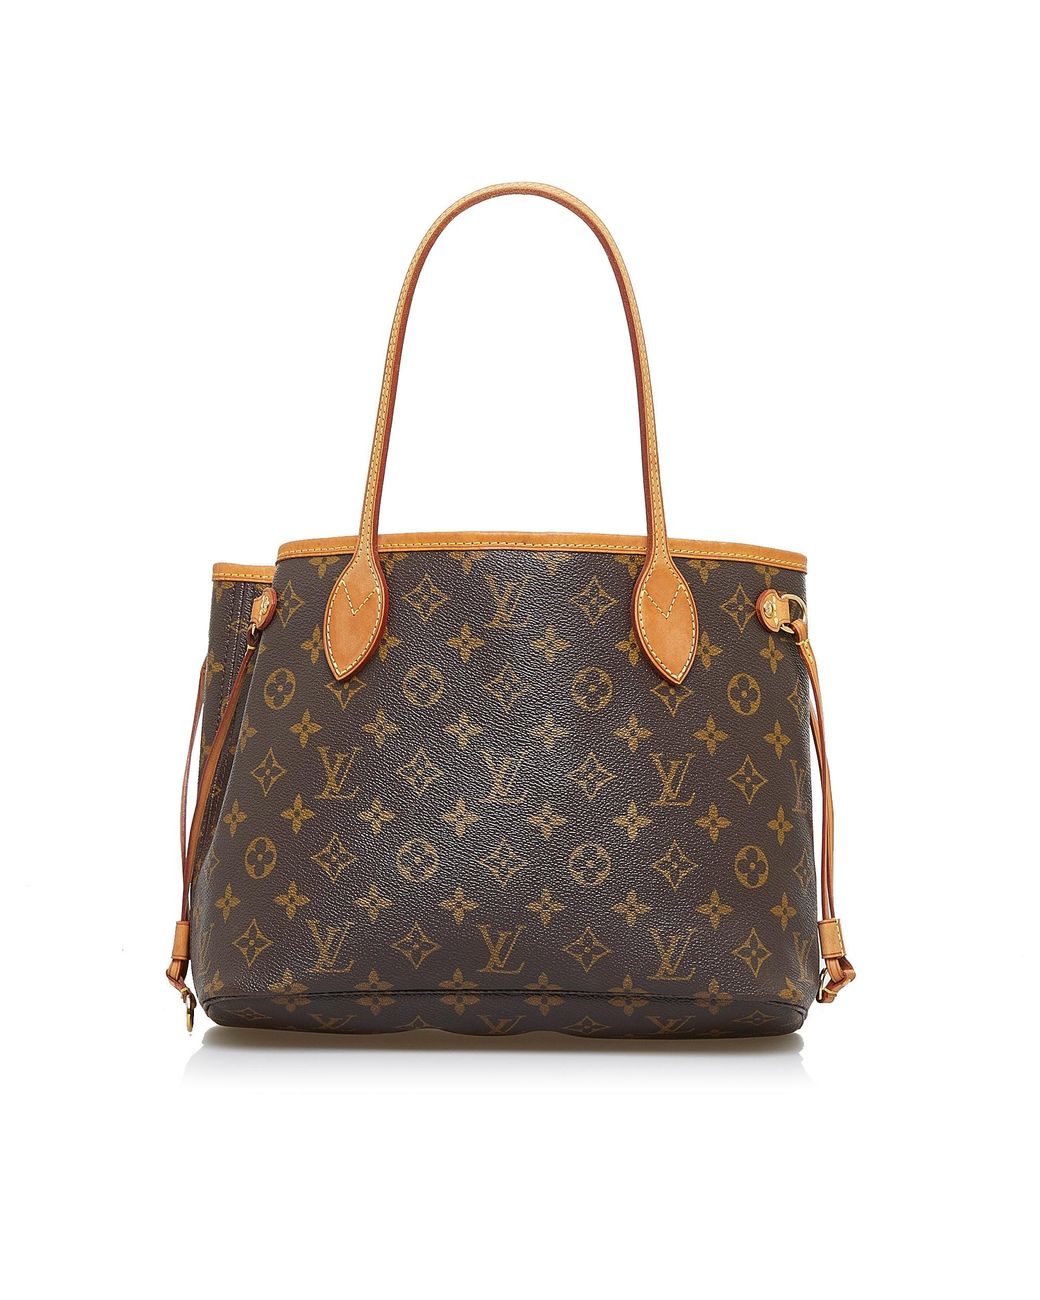 Louis Vuitton Neverfull Gm Navy Leather Tote Bag (Pre-Owned)